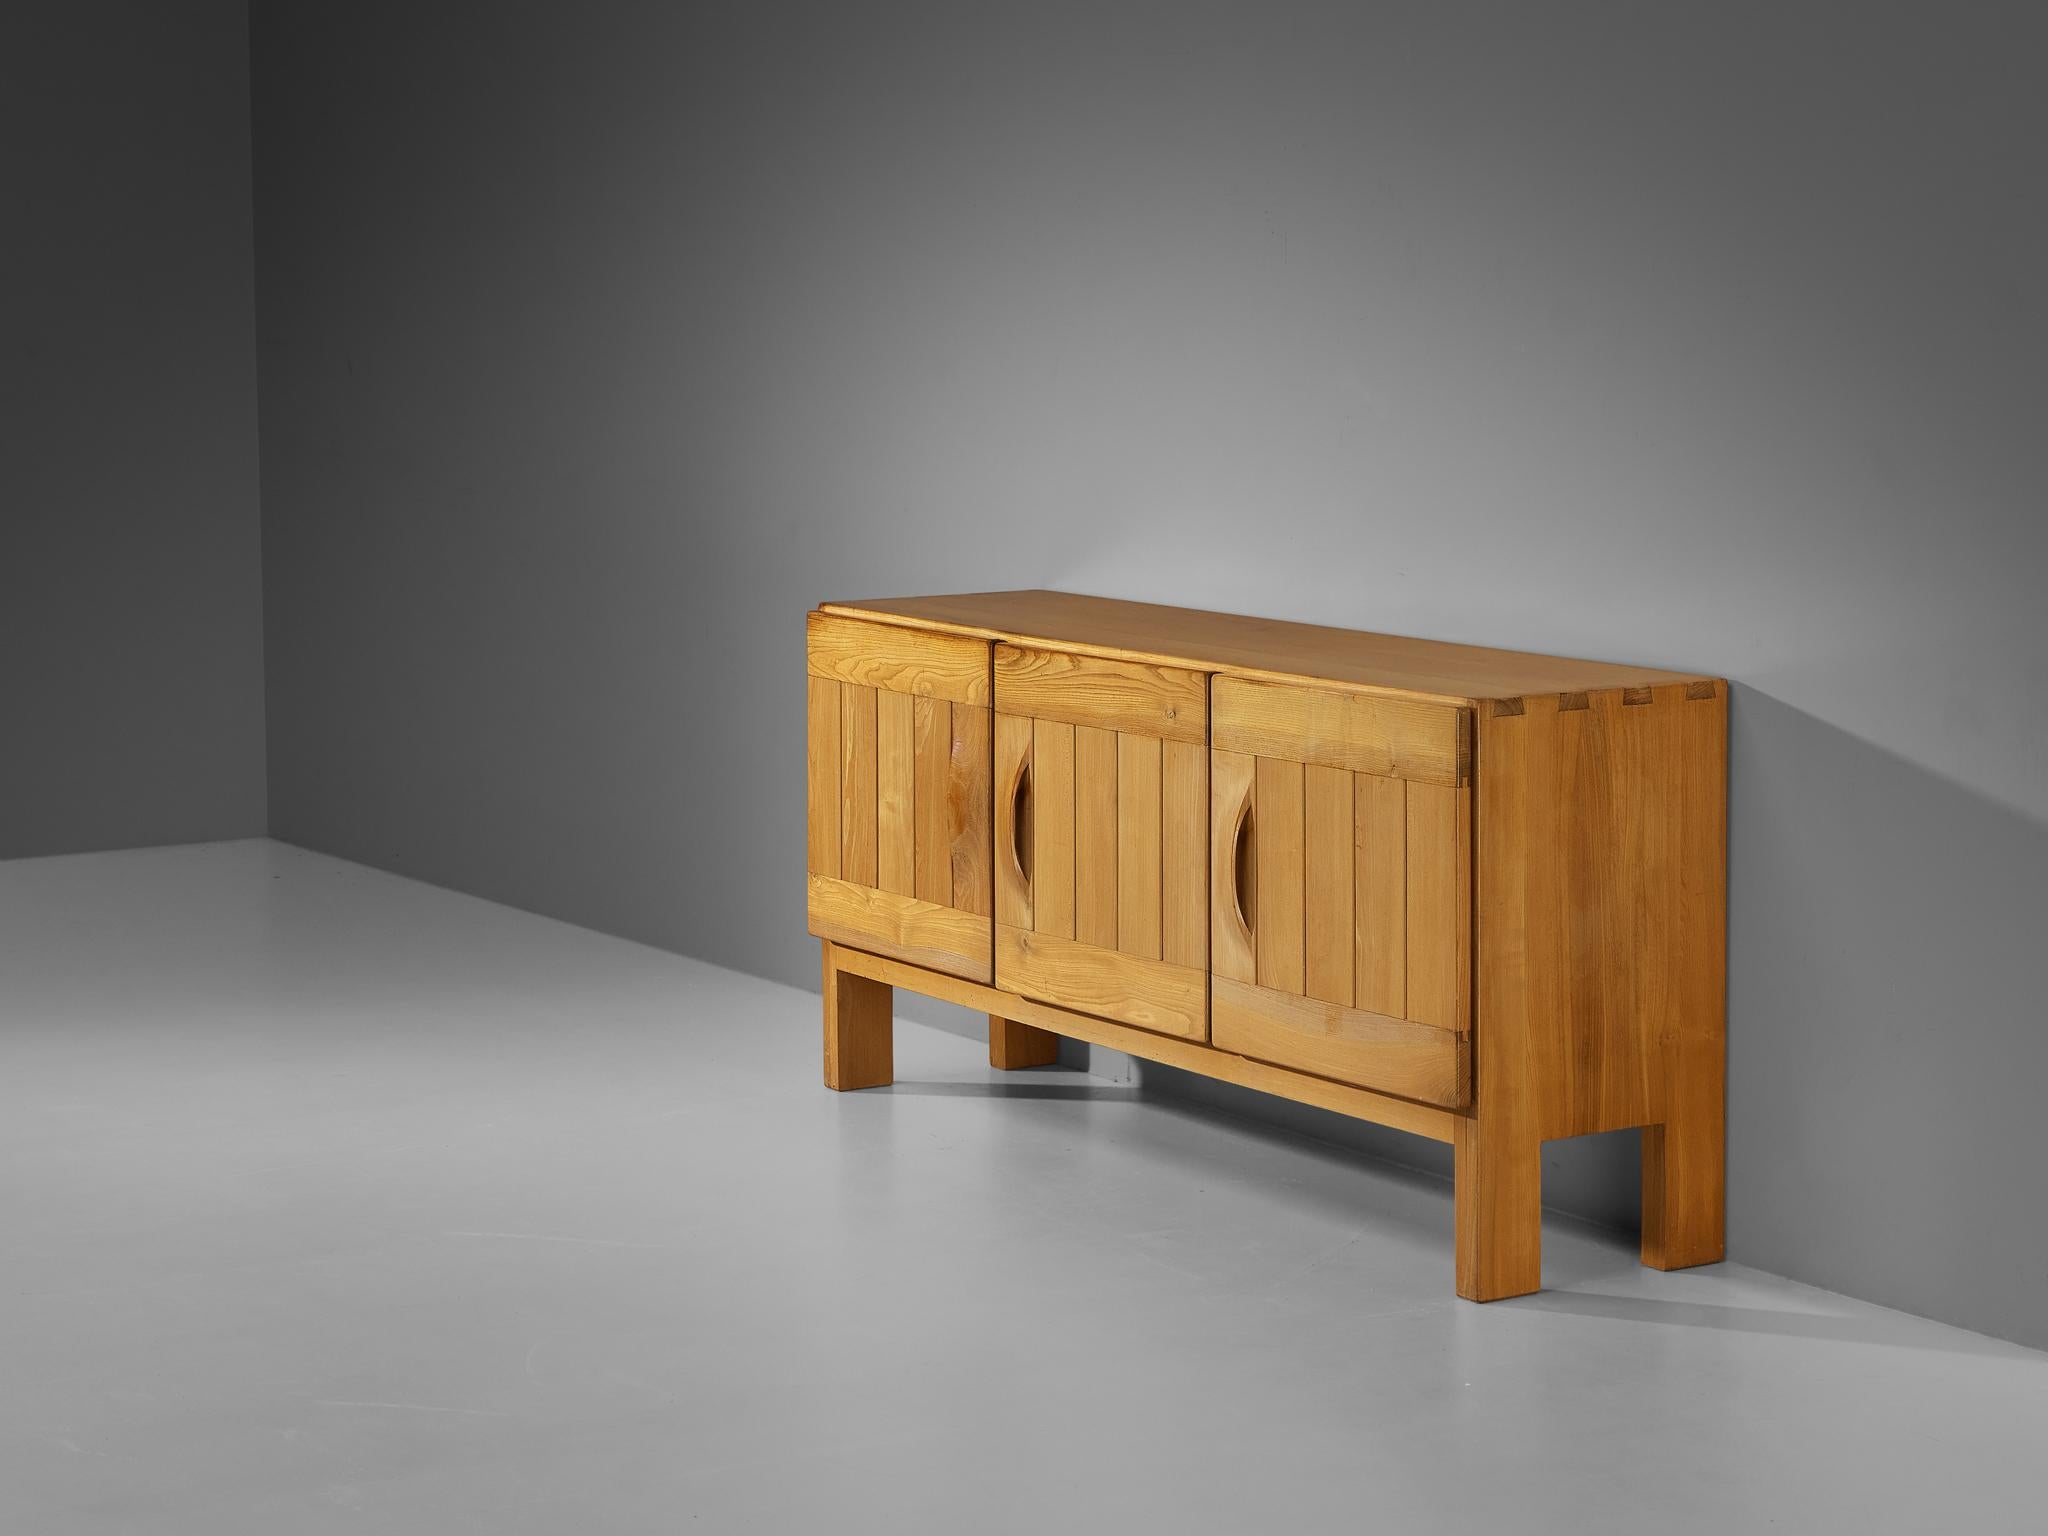 Maison Regain, sideboard, elm, France, 1960s.

This sideboard by Maison Regain combines a simplified yet complex design combined with nifty, solid construction details that characterizes their designs. The three well balanced, sturdy doors are